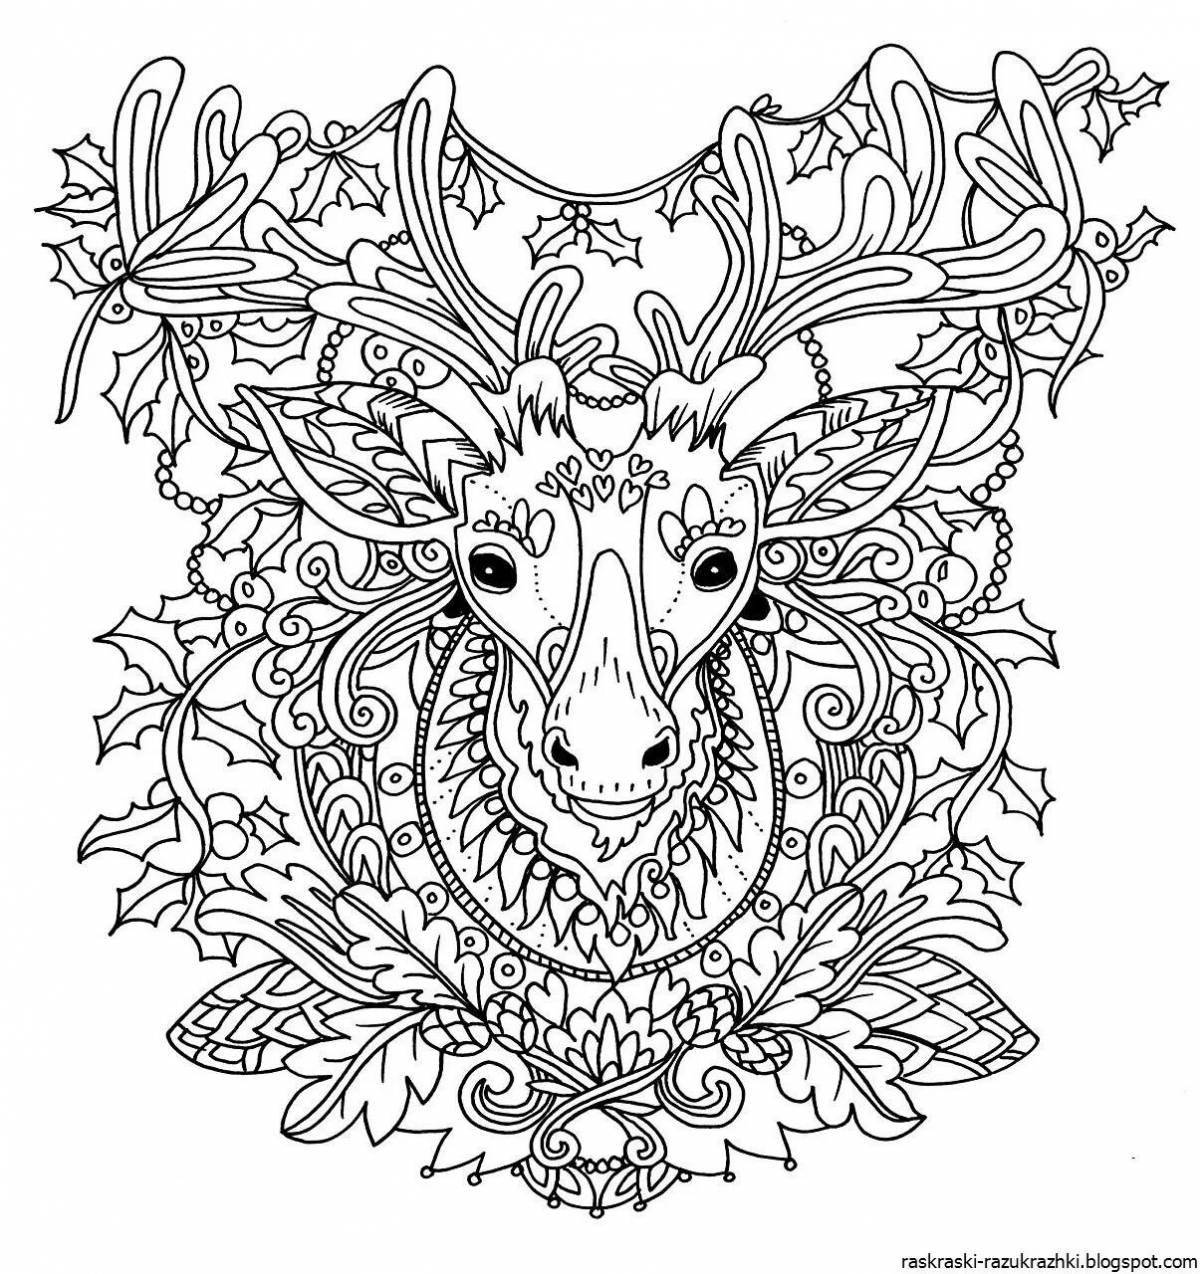 Exquisite animal coloring book for girls 12 years old